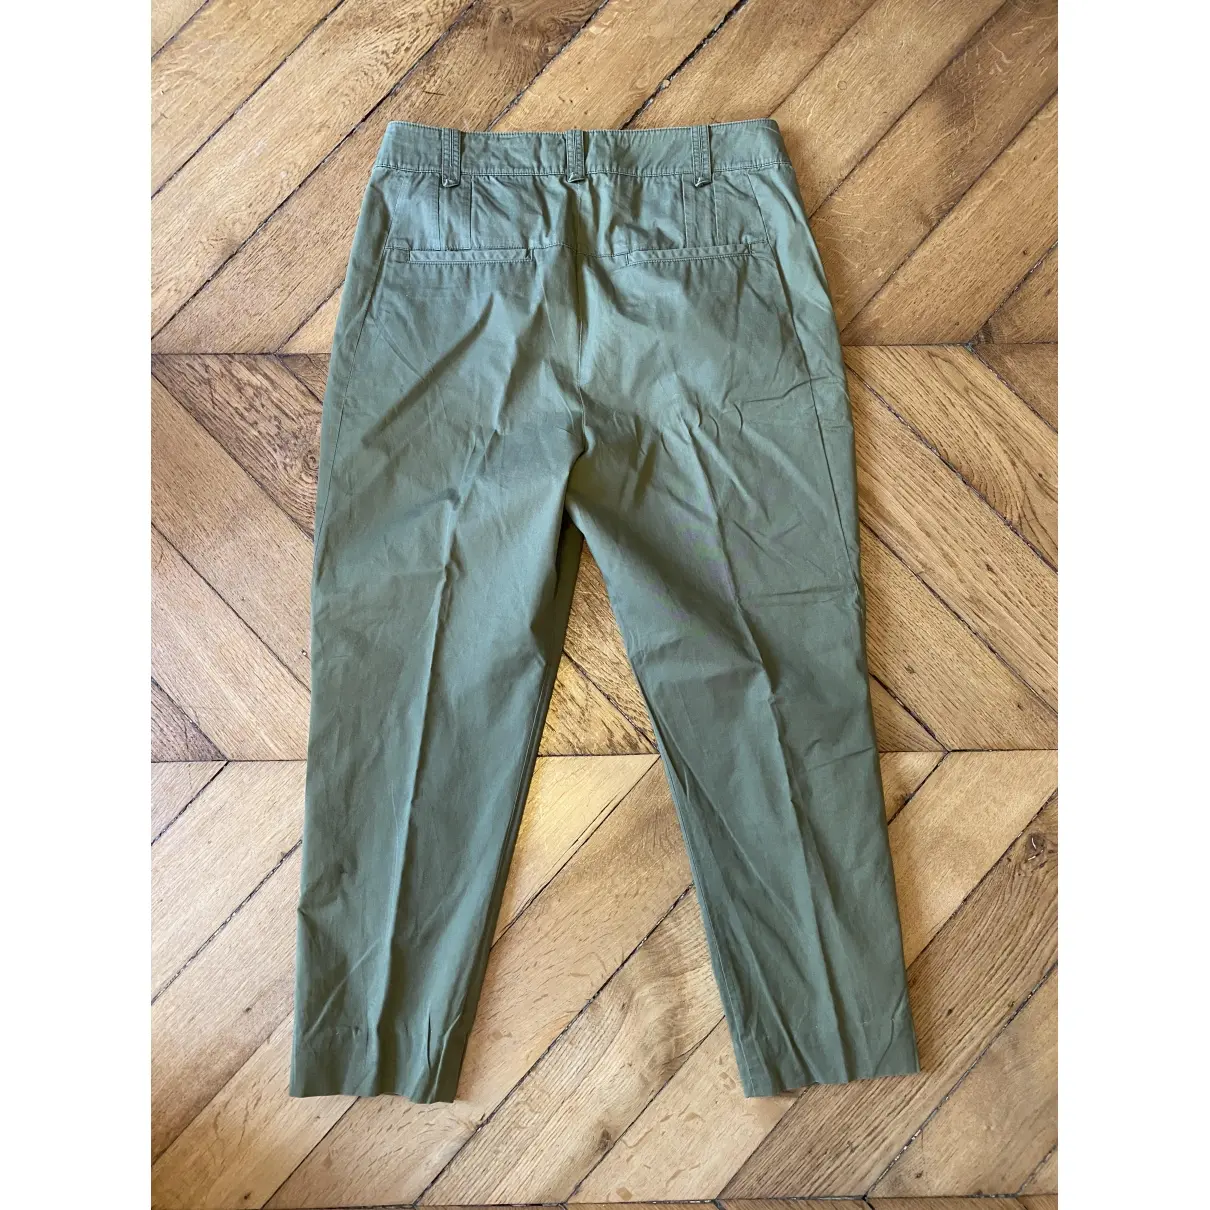 Kai Aakmann Trousers for sale